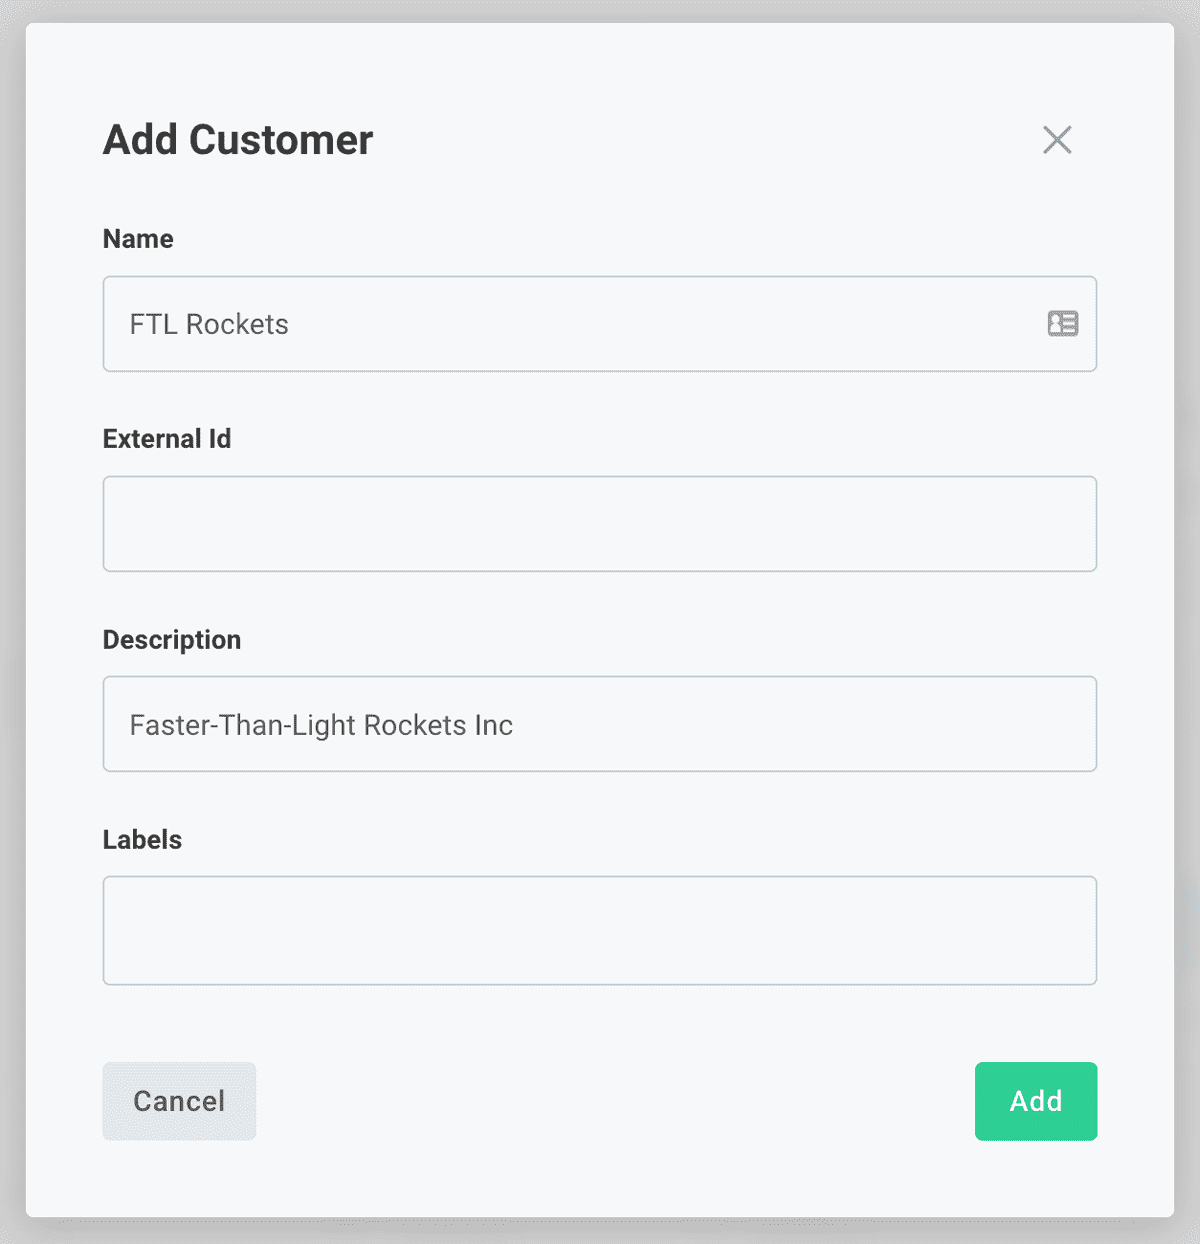 Add Customer page in Prismatic app